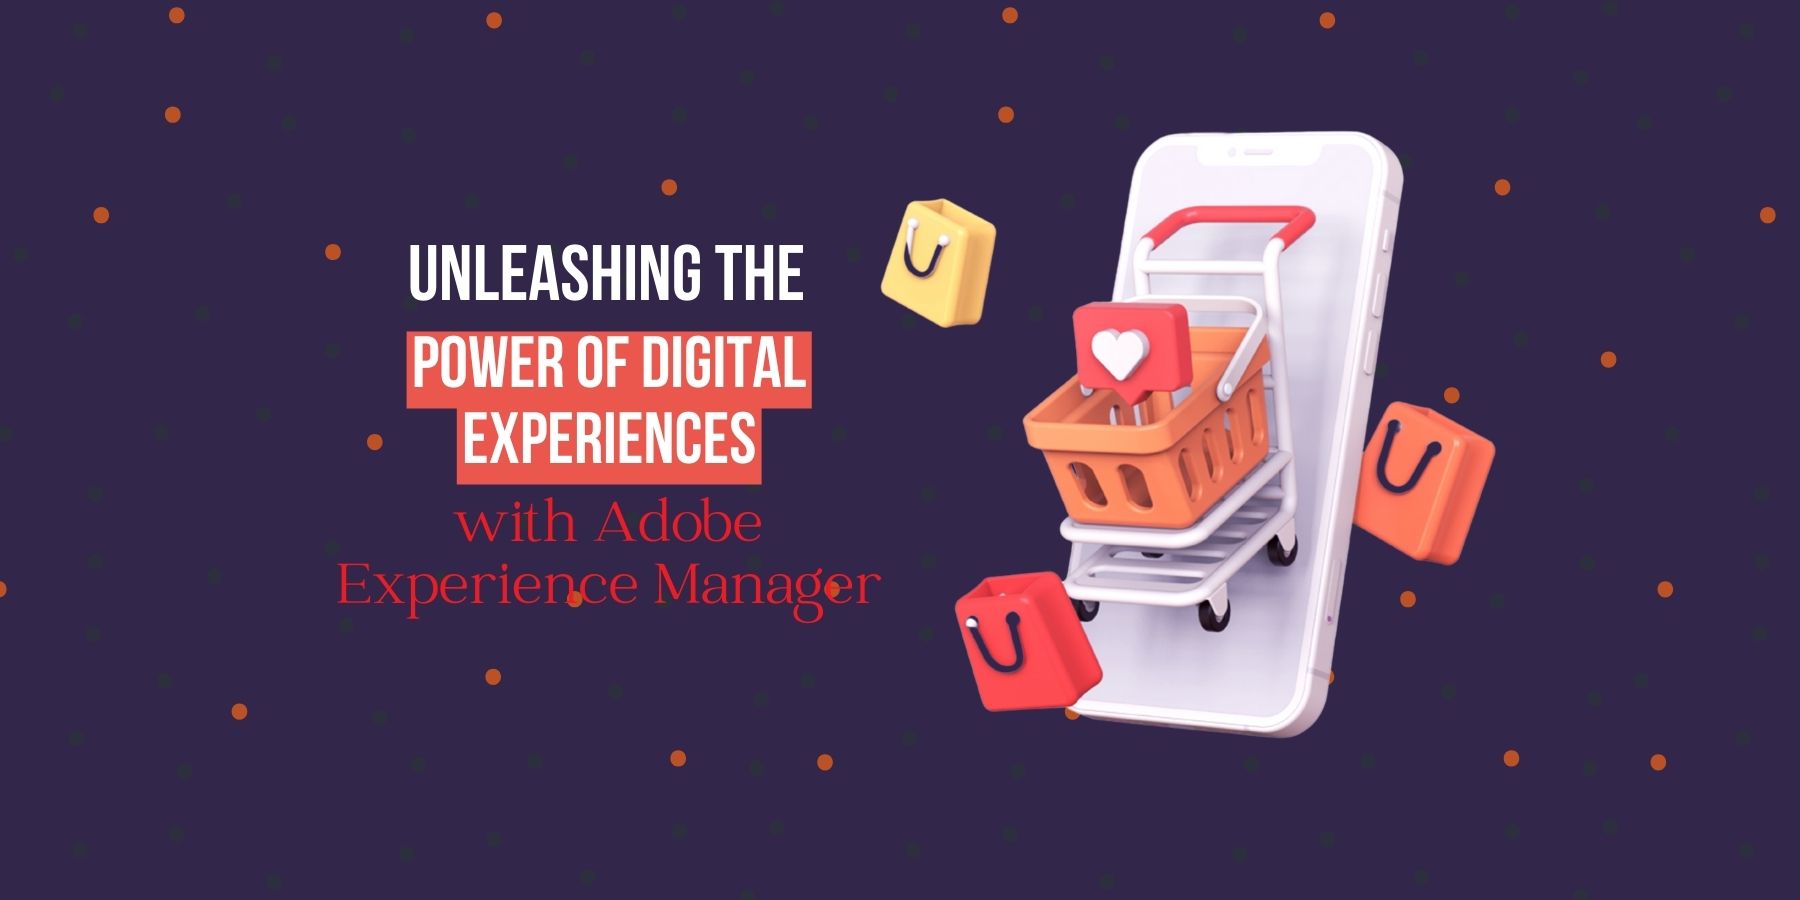 Unleashing the Power of Digital Experiences with Adobe Experience Manager